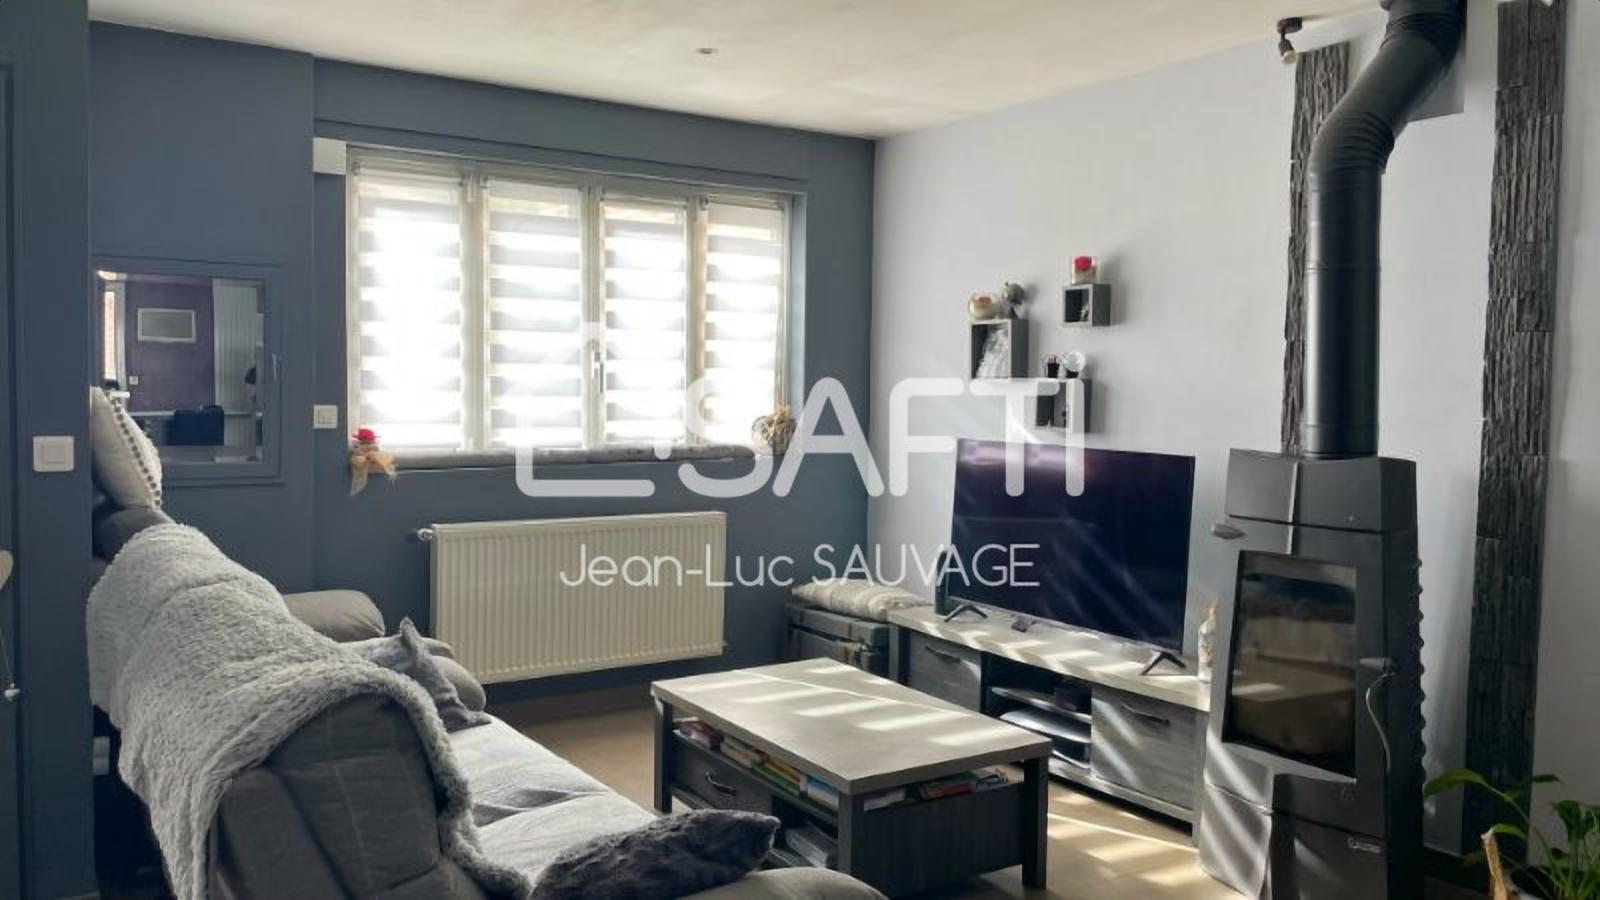 Jean-luc Sauvage Safti - Immobilier Lille Metropole Tourcoing